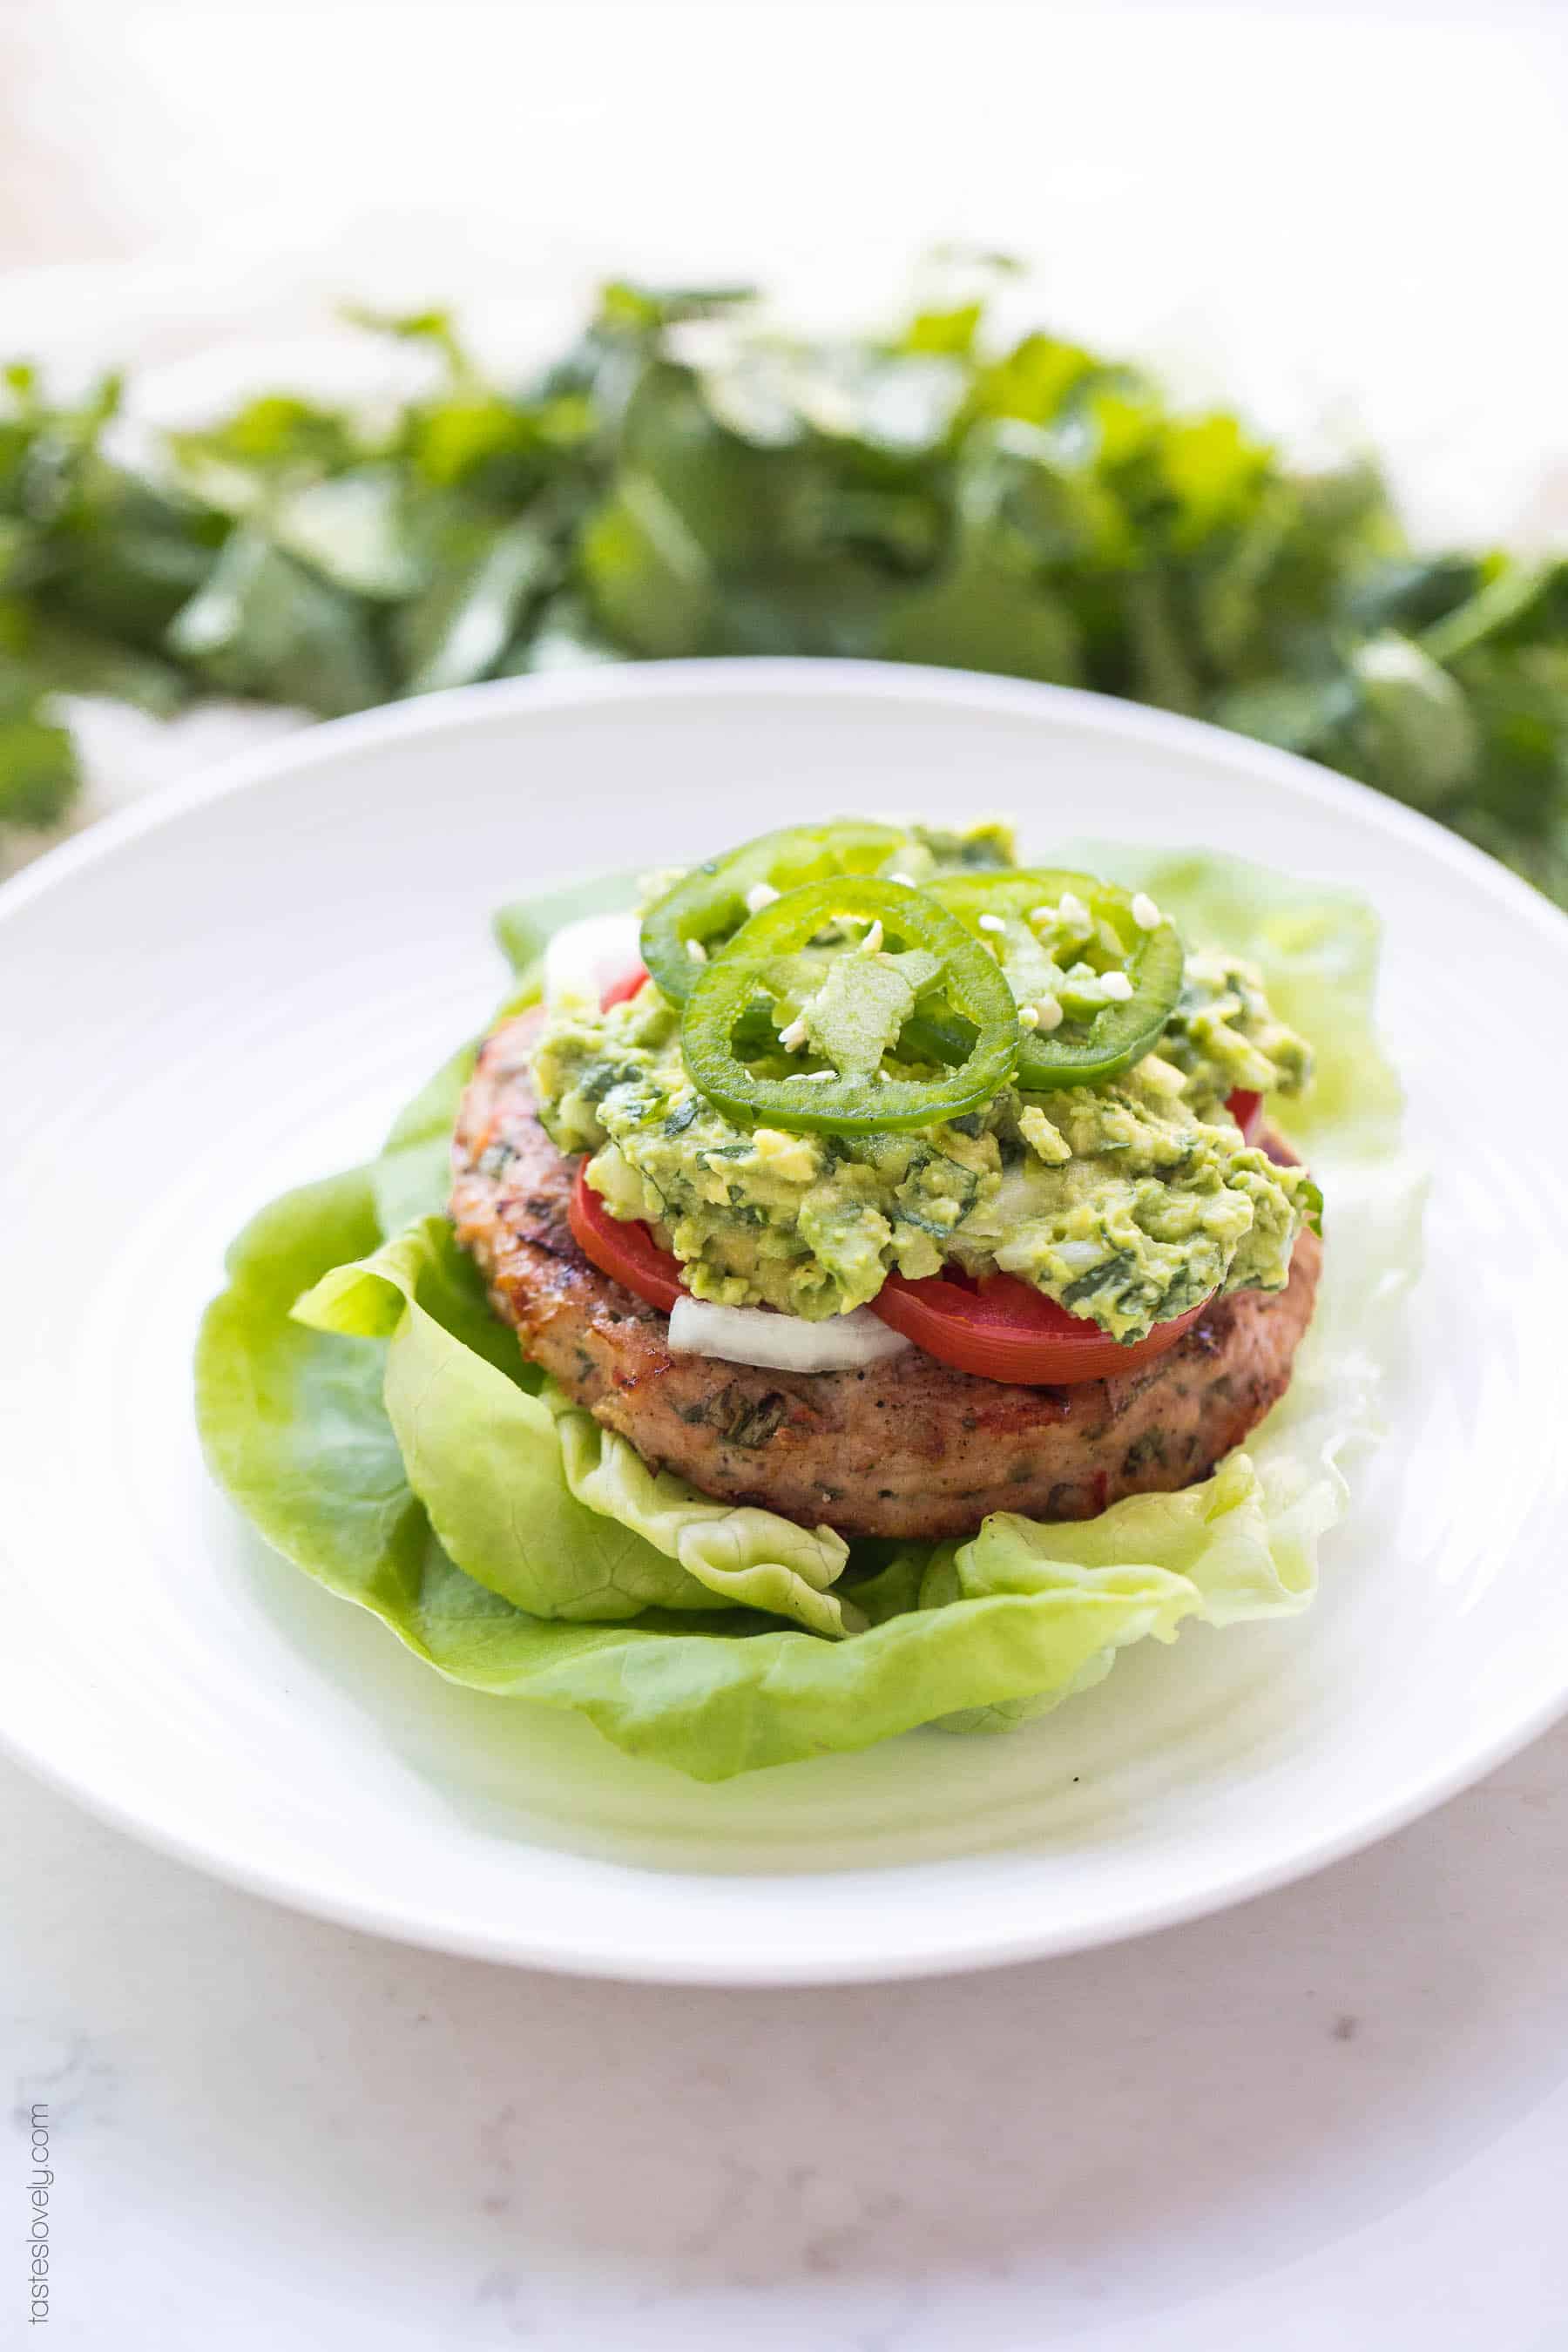 Paleo + Whole30 Mexican Turkey Burger Recipe - turkey burgers packed with Mexican flavor and topped with guacamole. A delicious and healthy 30 minute dinner! #paleo #whole30 #keto #glutenfree #grainfree #dairyfree #sugarfree #cleaneating #realfood